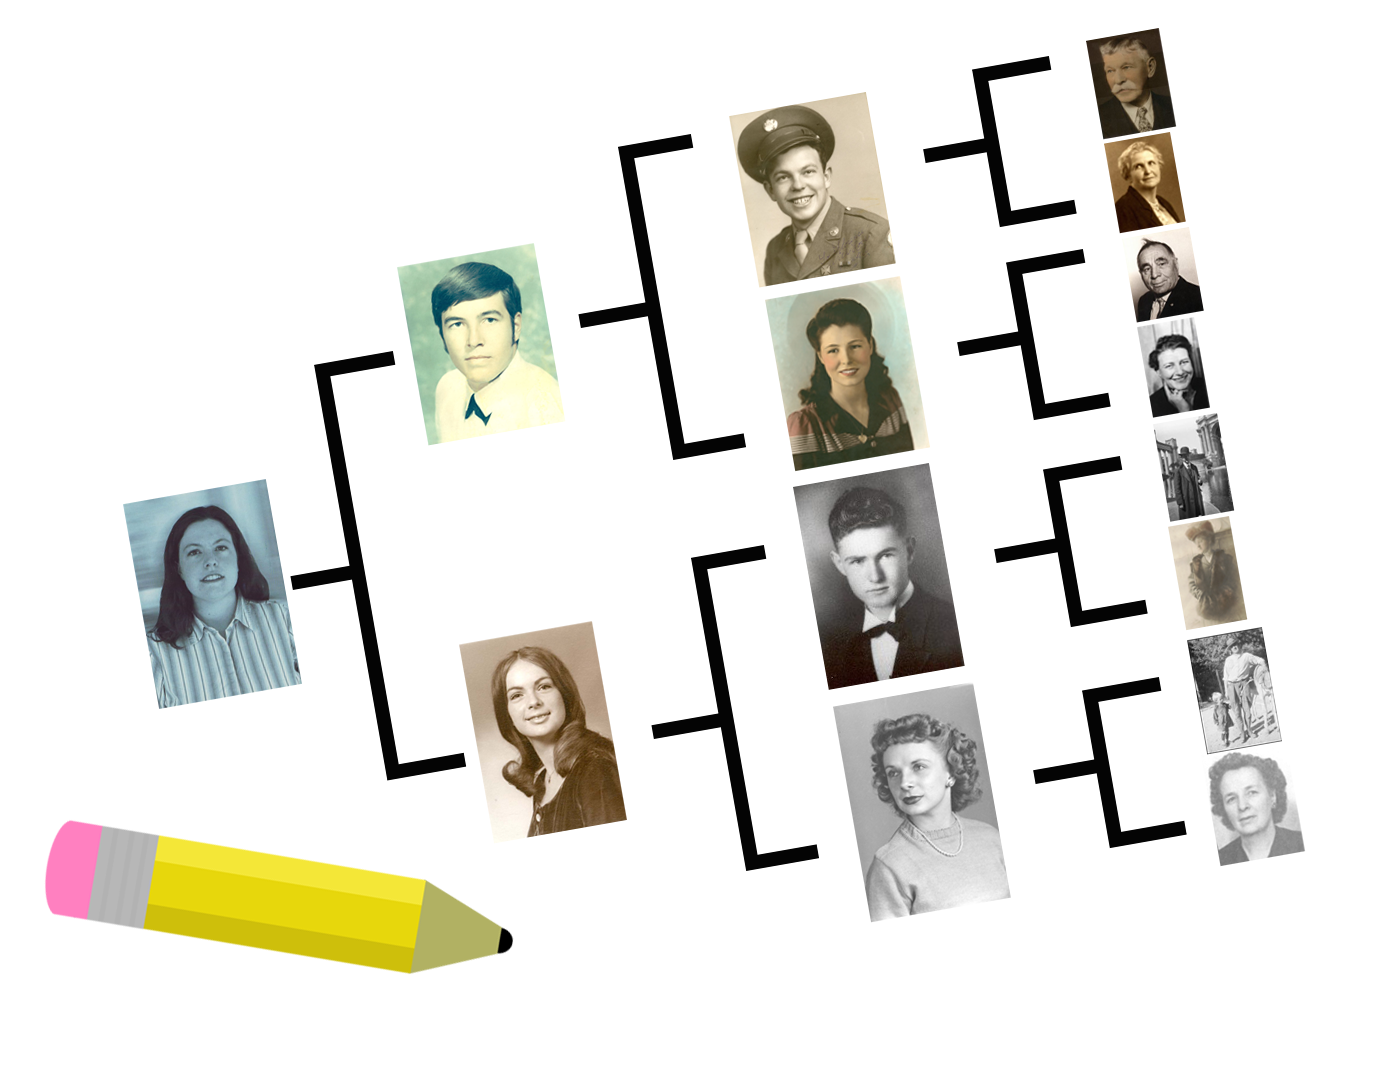 Researching Your Family History